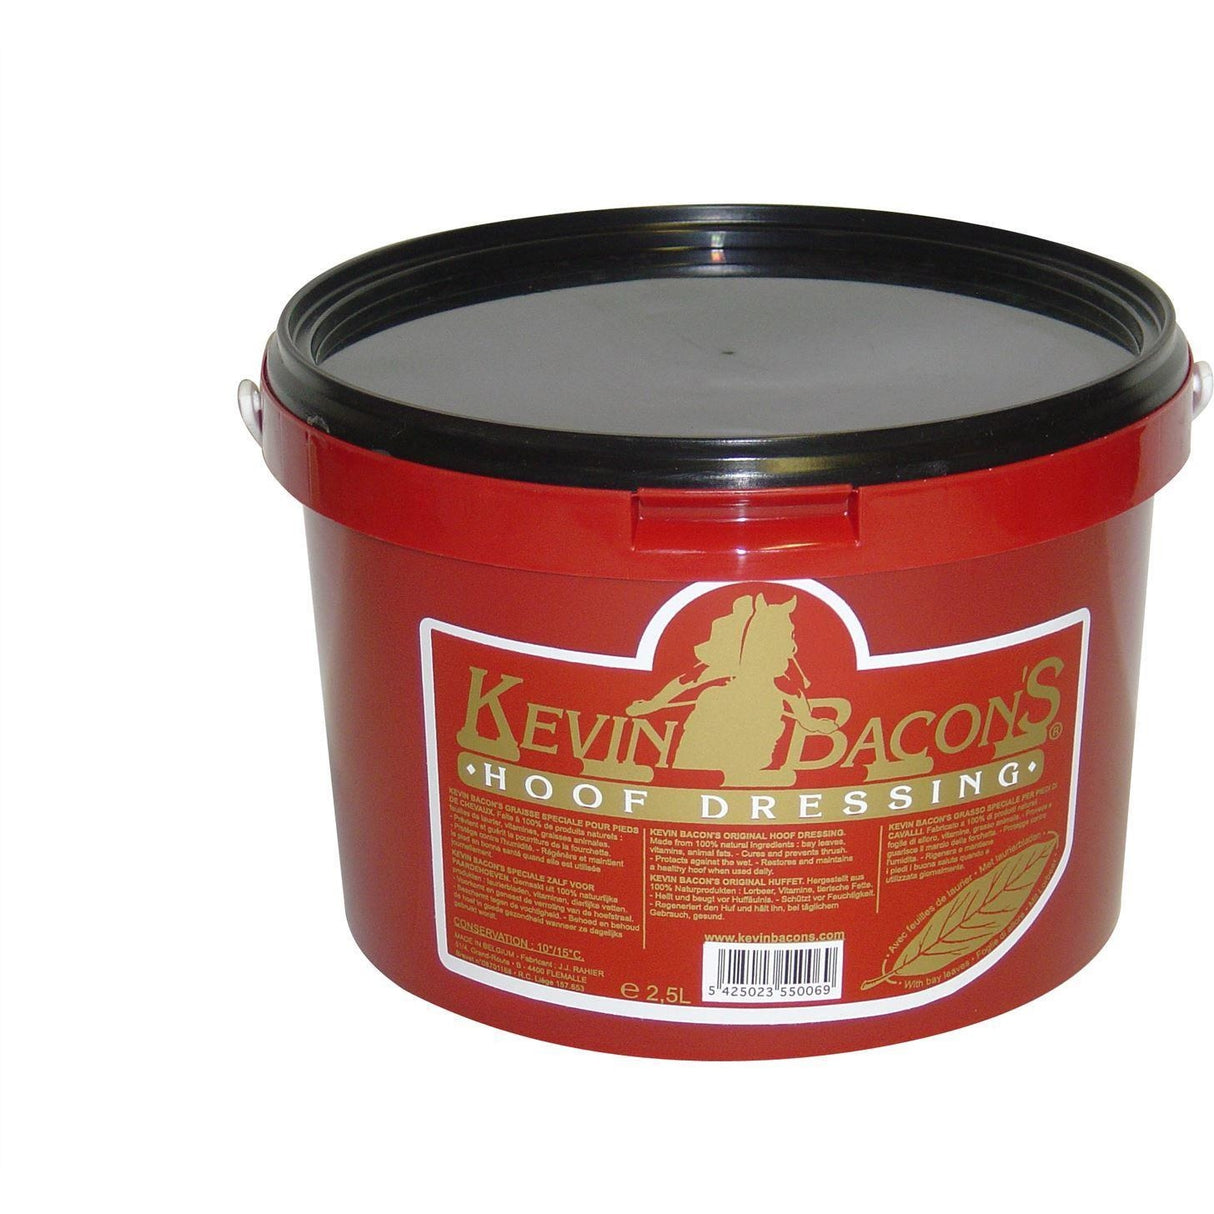 Kevin Bacon's Hoof Dressing with Natural Burnt Ash